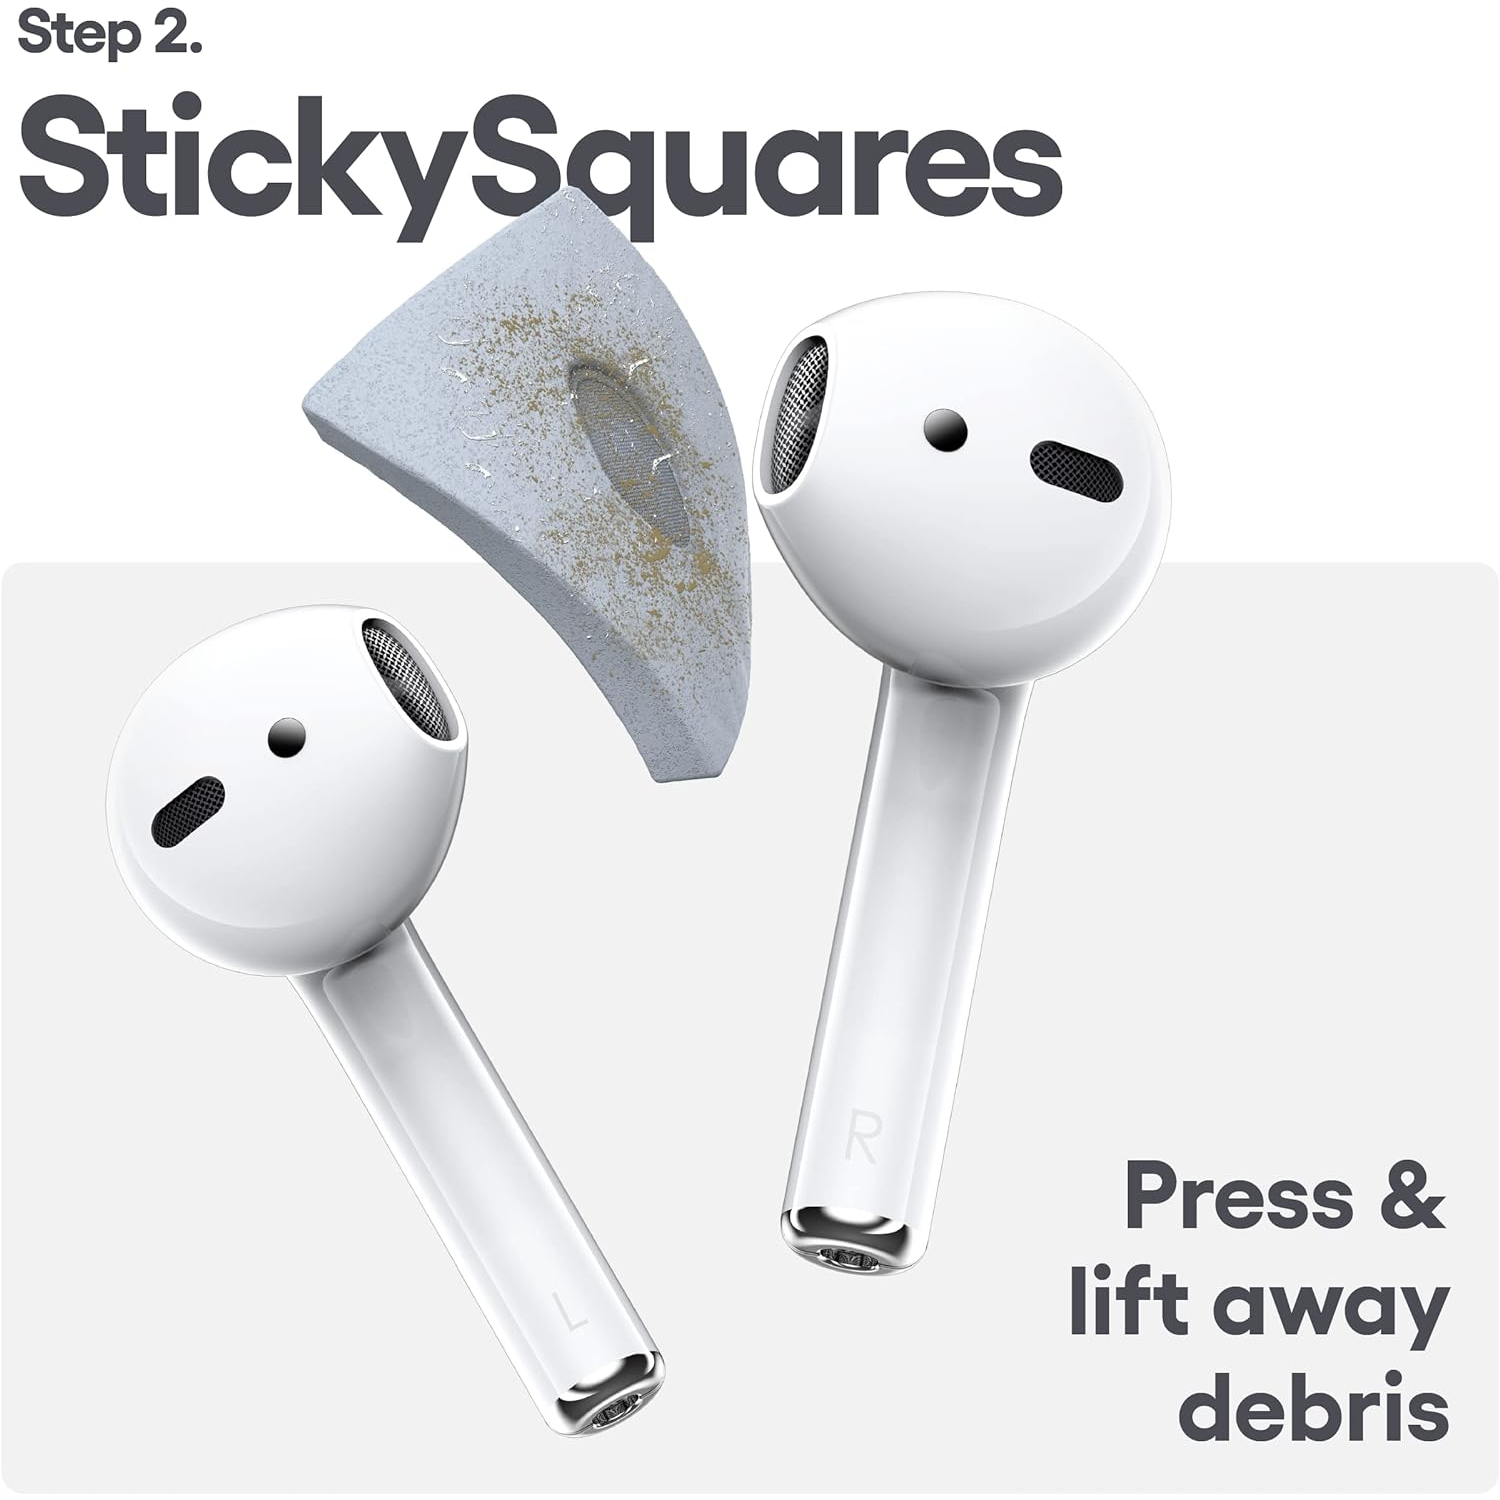 KeyBudz AirCare AirPods Cleaning Kit